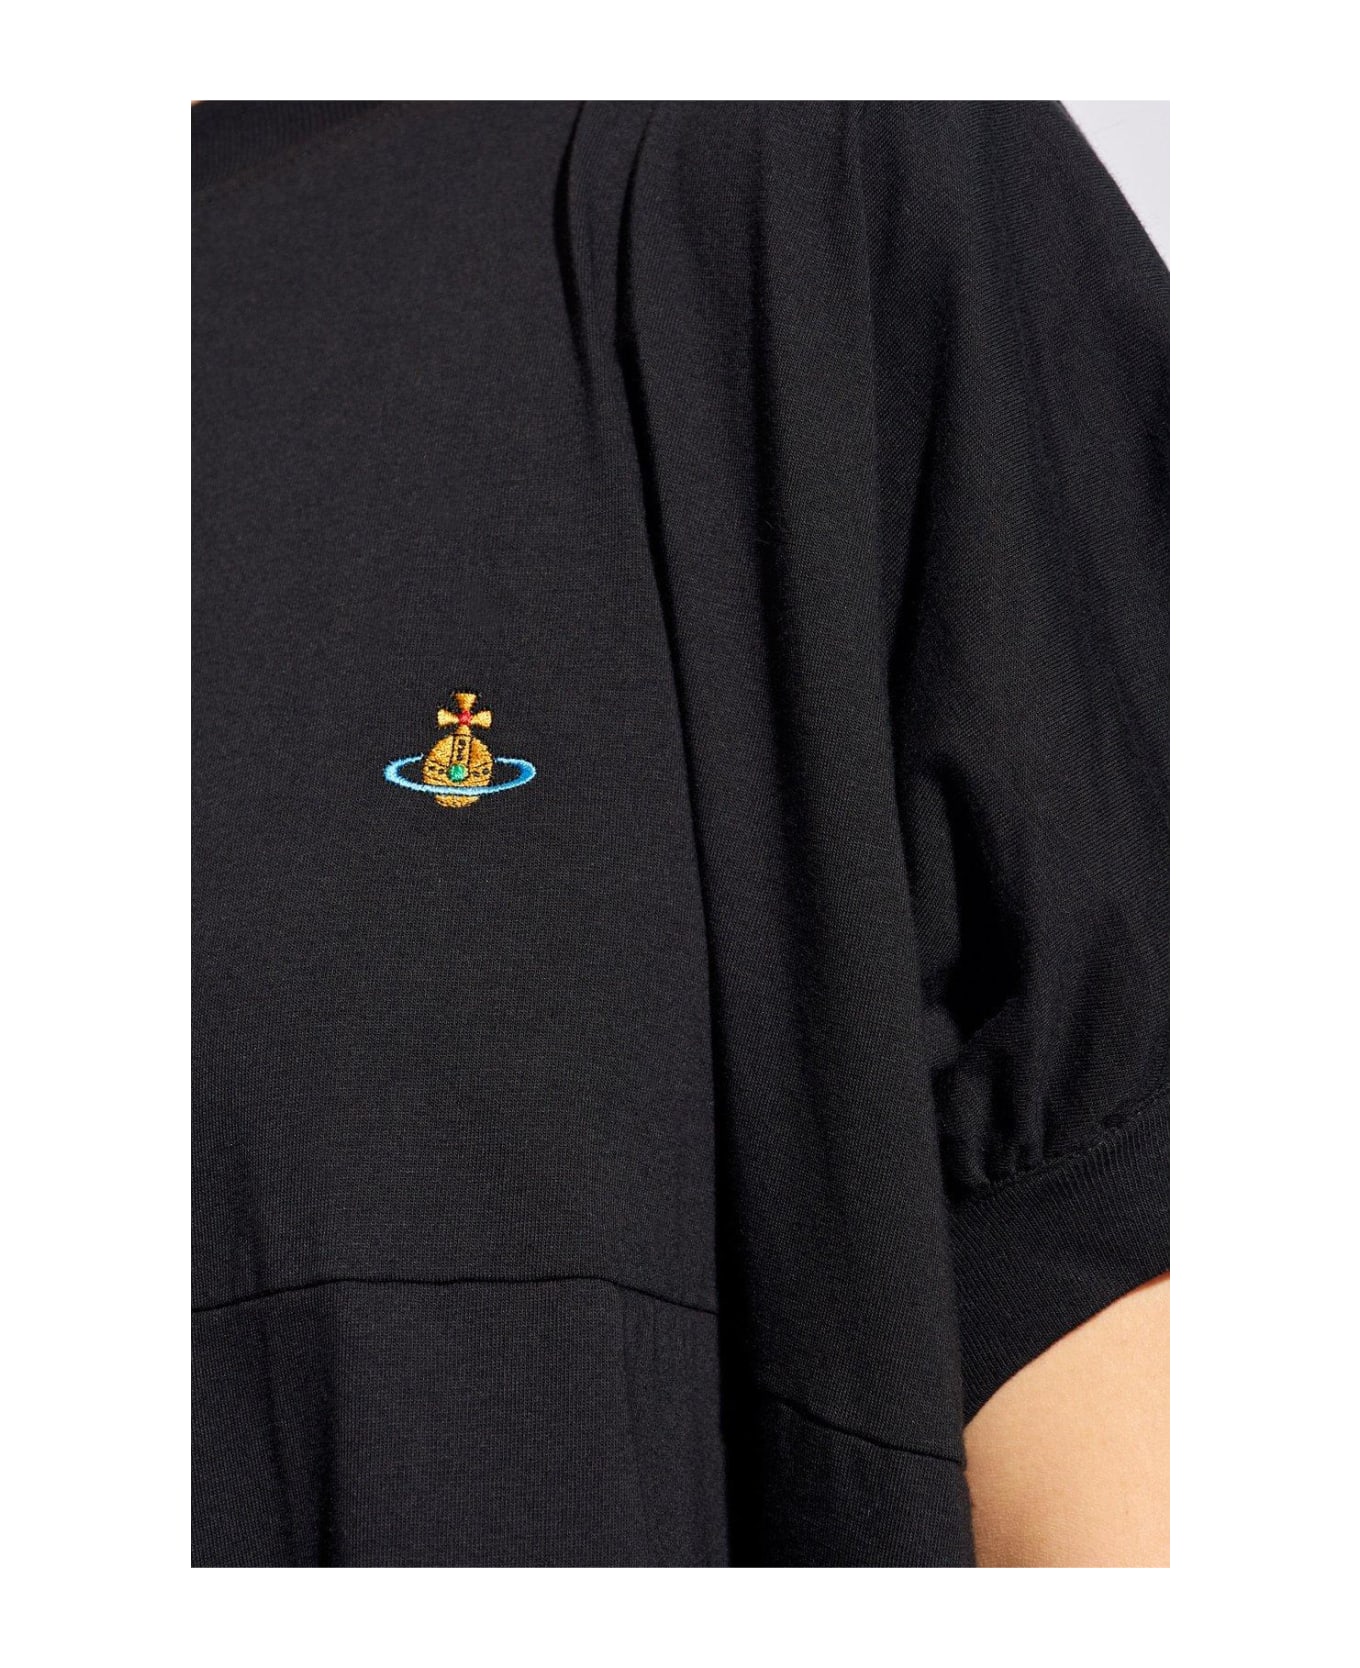 Vivienne Westwood Orb Embroidered Cut-out Oversized Top - Black トップス